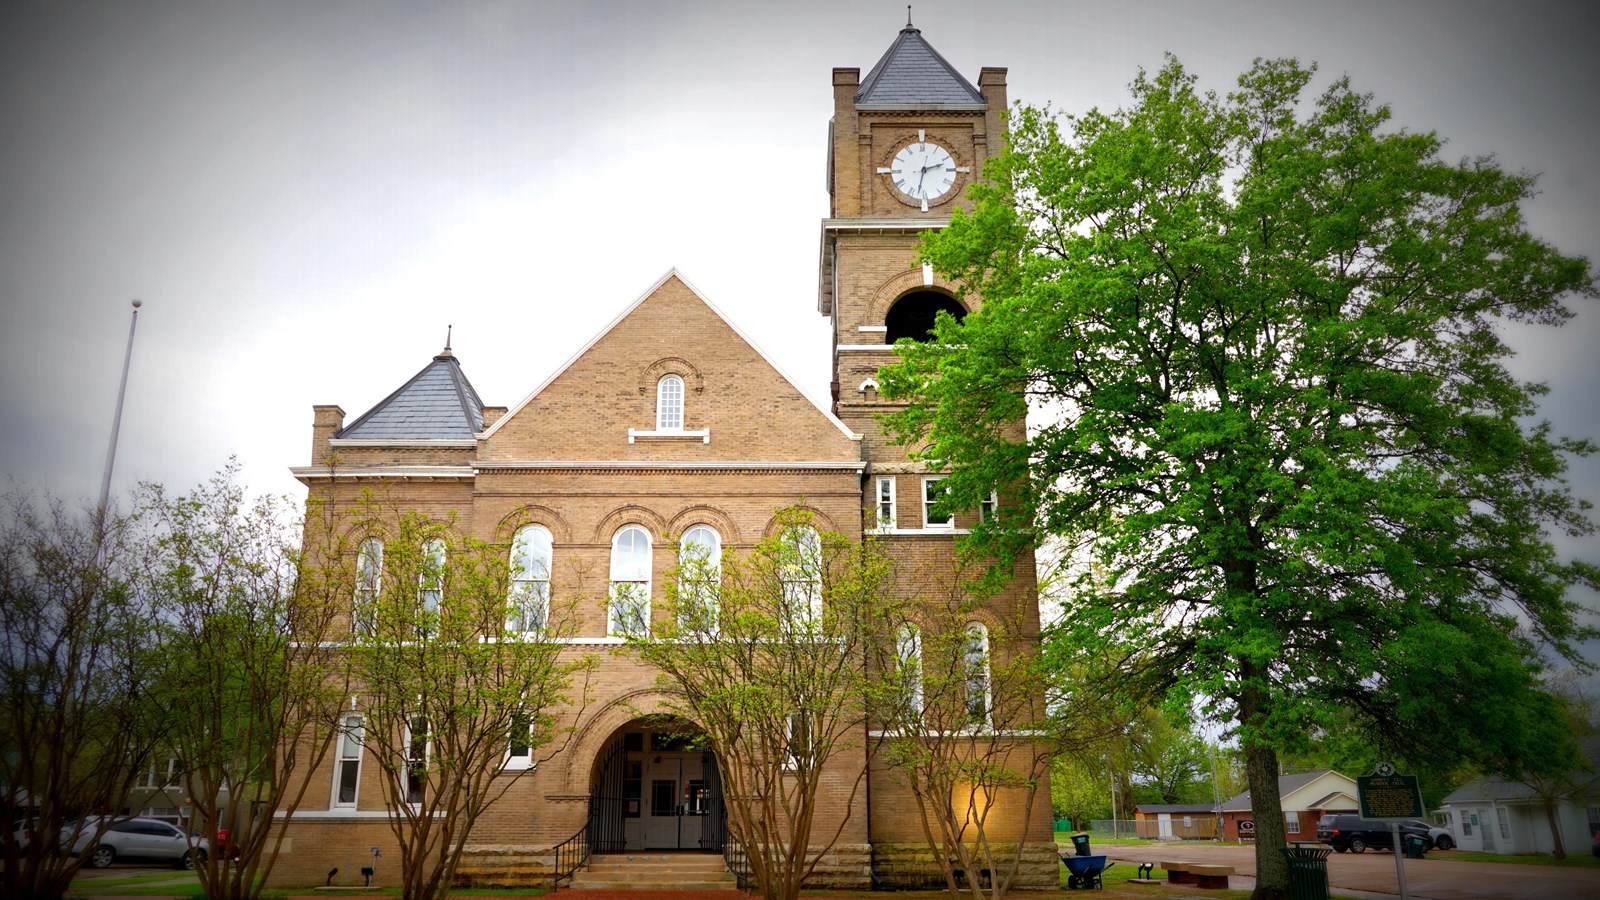 Front of a two-story brick courthouse with a clock tower. A tree stands in front. 